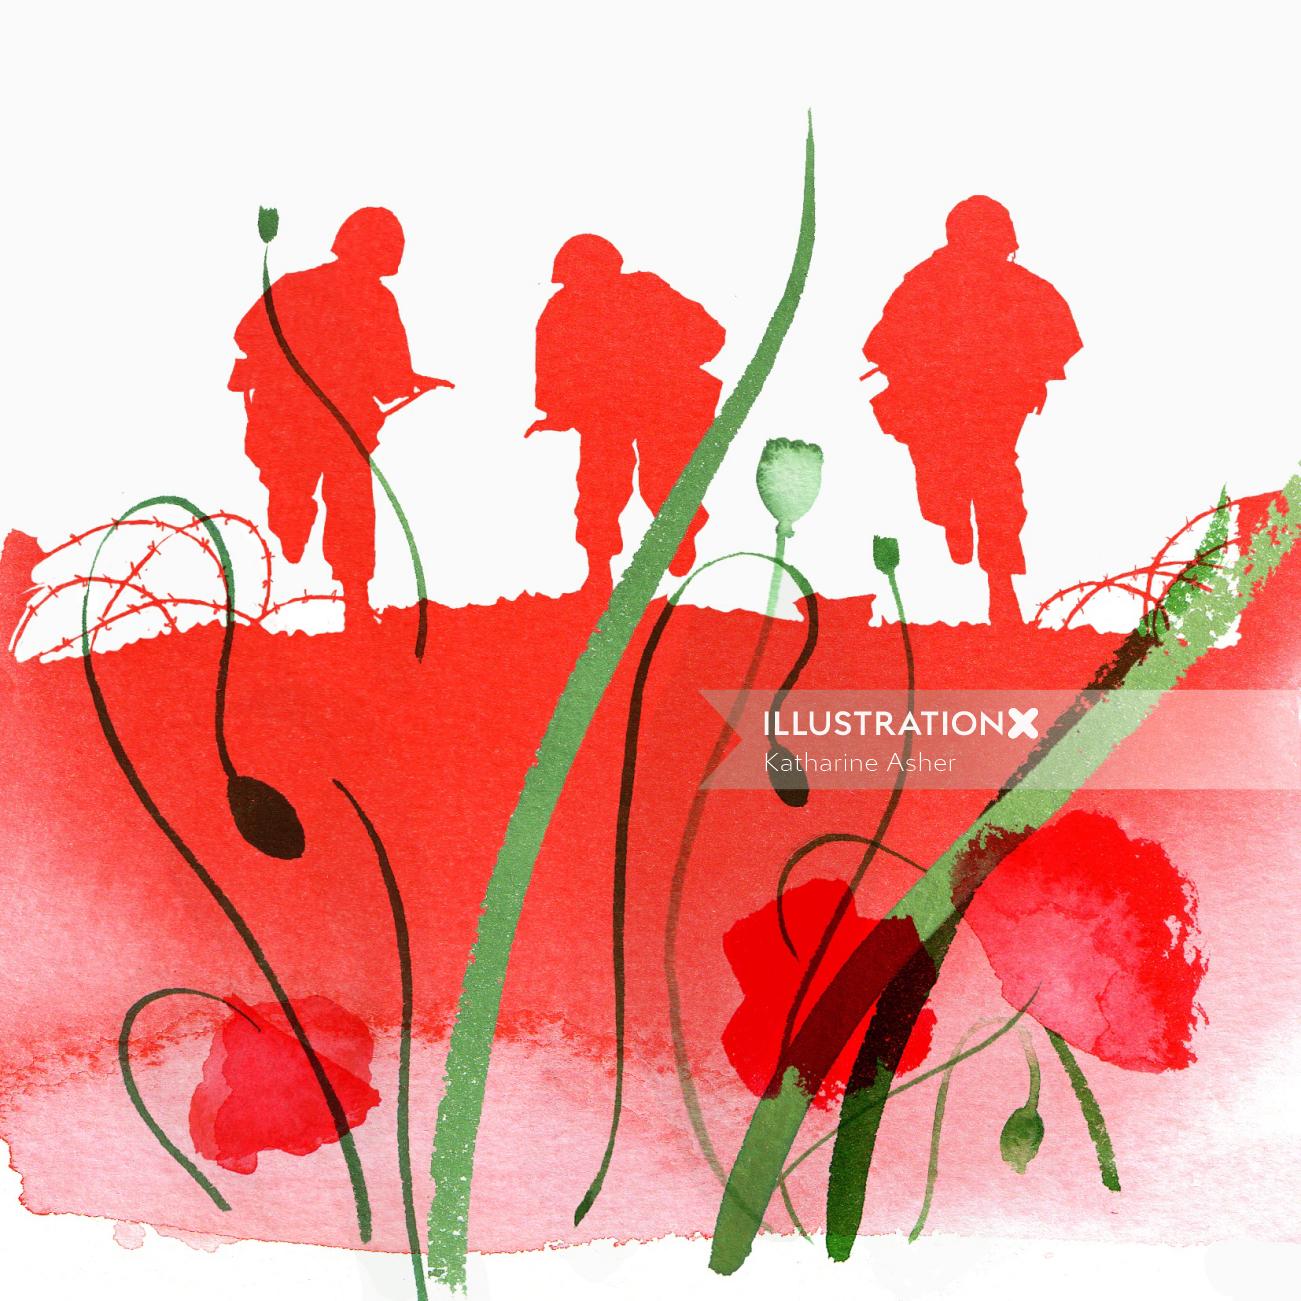 Remembrance Day Stamp for Jersey Post 2014 - An illustration by Katharine Asher